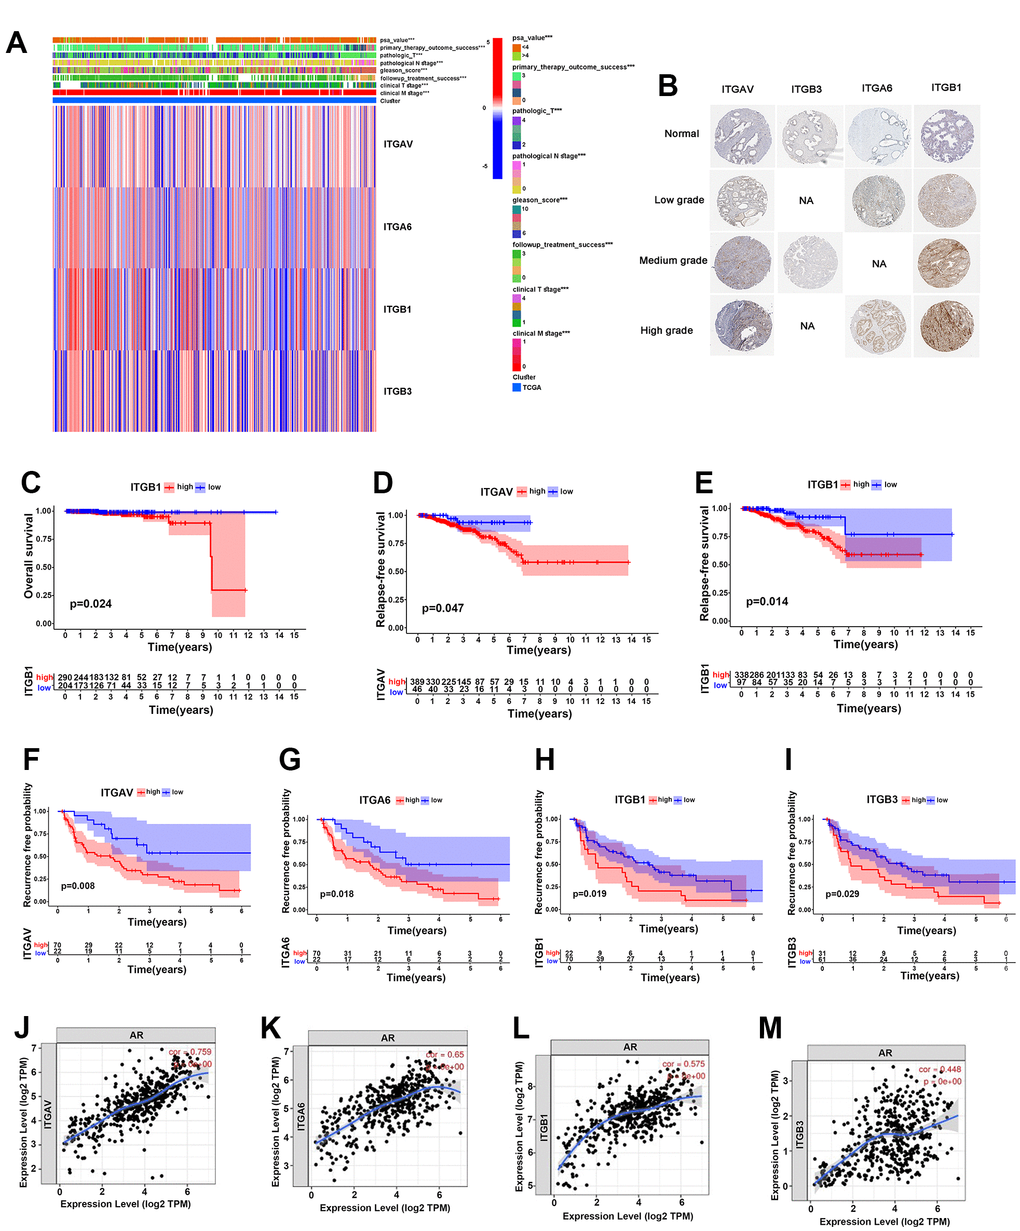 Integrin αvβ3/α6β1 were closely correlated with poor prognosis of PCa patients. (A) Heatmap of integrin αvβ3/α6β1 expression and clinical characteristics of 496 PCa patients in the TCGA cohort. (B) The immunohistochemistry of integrin αvβ3/α6β1 between normal prostate tissues and different grades of PCa tissues in the Human Protein Atlas (HPA). (C) Kaplan-Meier analysis of the OS of patients with high and low ITGB1 expression in the TCGA cohort. (D, E) Kaplan-Meier analysis of the RFS of patients with high and low ITGAV (D) and ITGB1 (E) expression in the TCGA cohort. (F–I) Kaplan-Meier analysis of the biochemical recurrence of patients with high and low ITGAV, ITGA6, ITGB1, and ITGB3 expression in the TCGA cohort. (J–M) Correlations between ITGAV, ITGA6, ITGB1, ITGB3 and androgen receptor (AR).